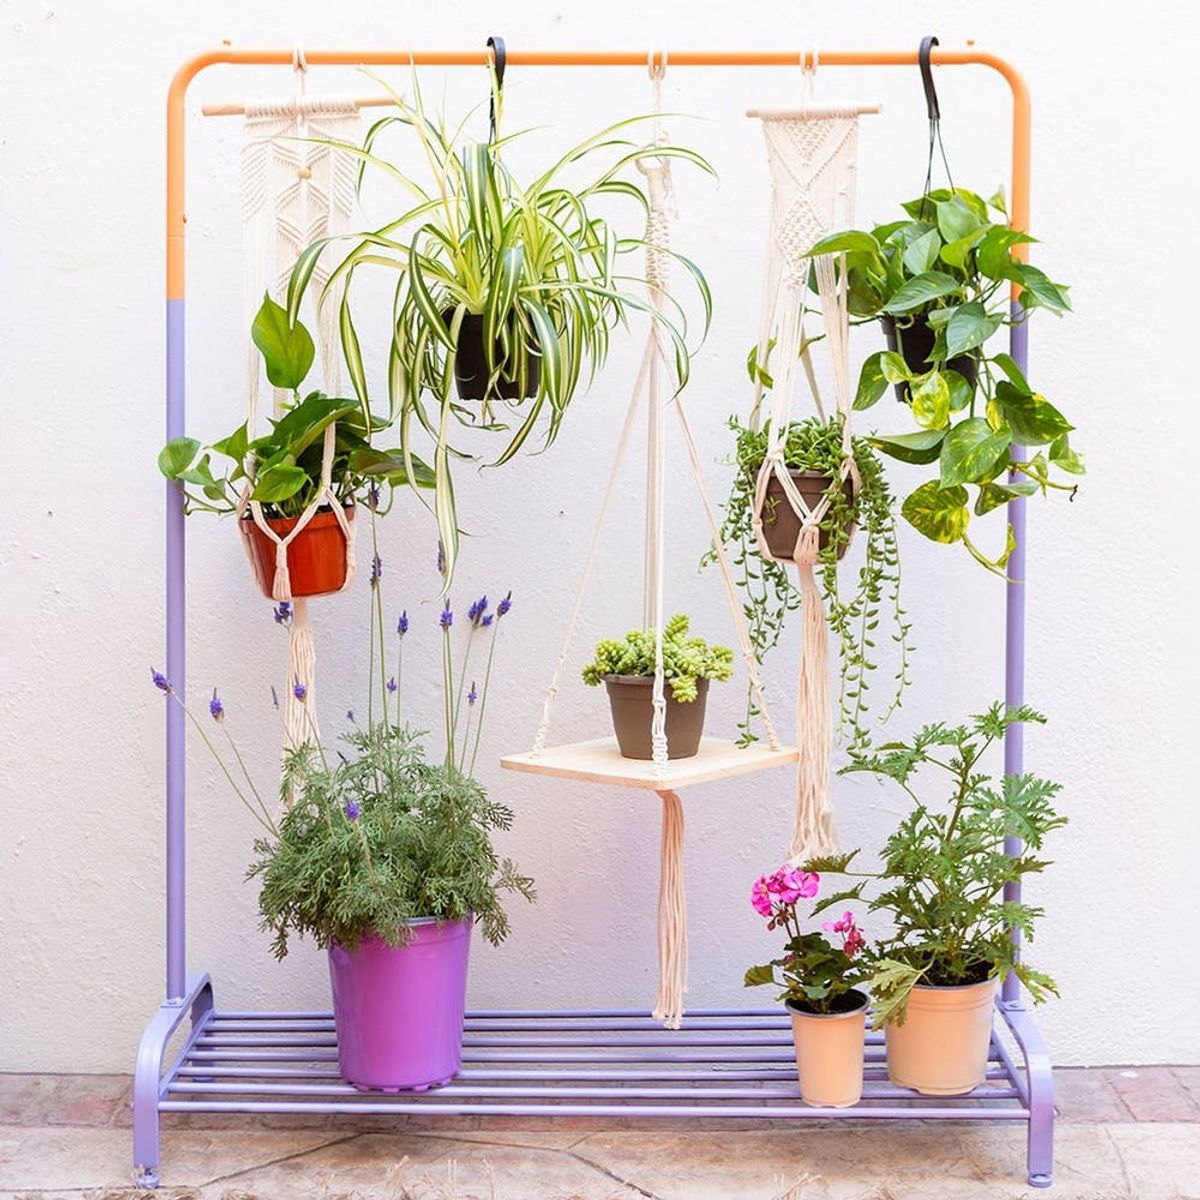 6 Brilliant Home Hacks to Improve Your Outdoor Space